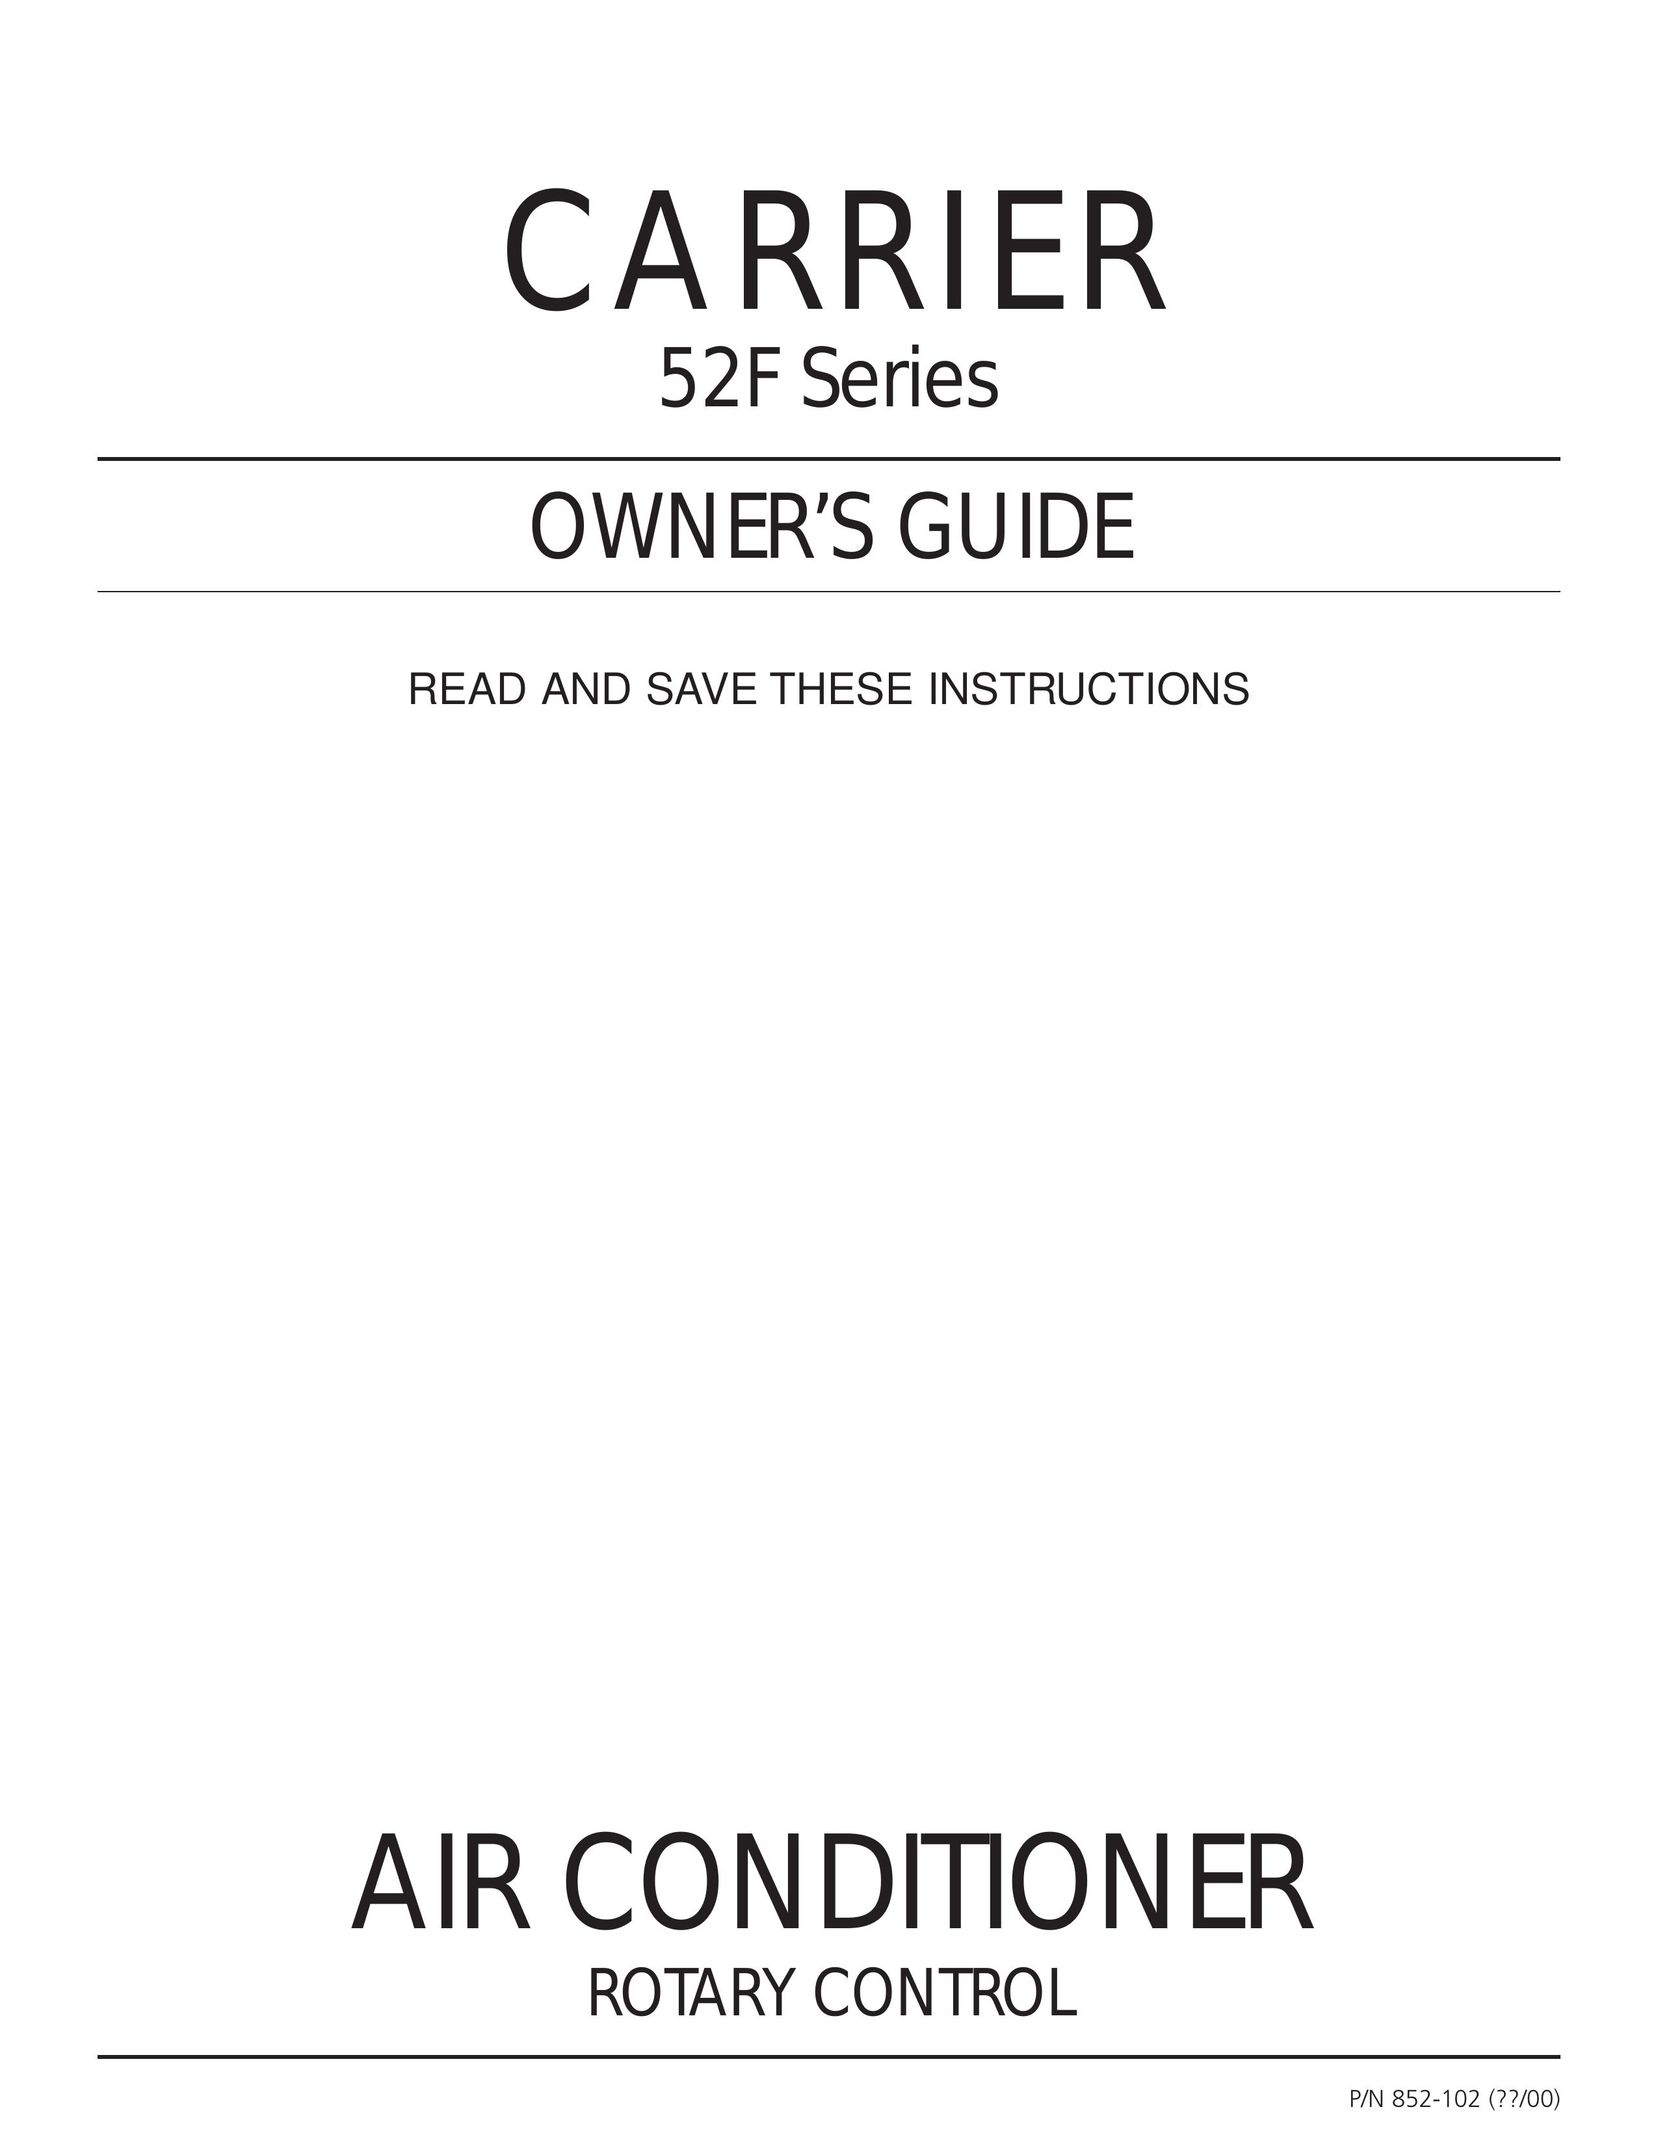 Carrier Access 52F Series Air Conditioner User Manual